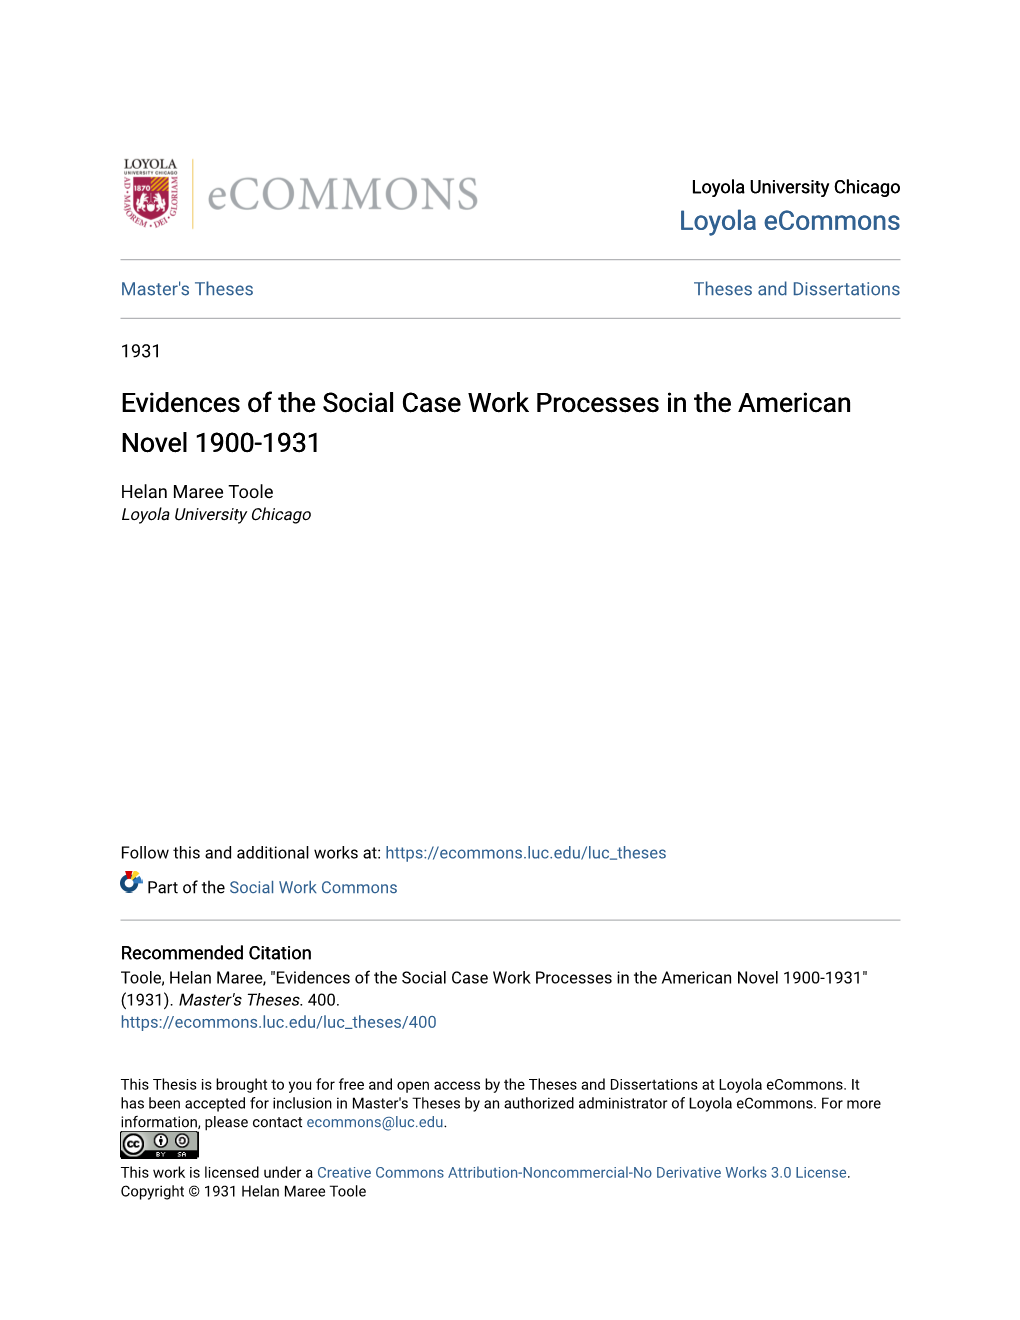 Evidences of the Social Case Work Processes in the American Novel 1900-1931